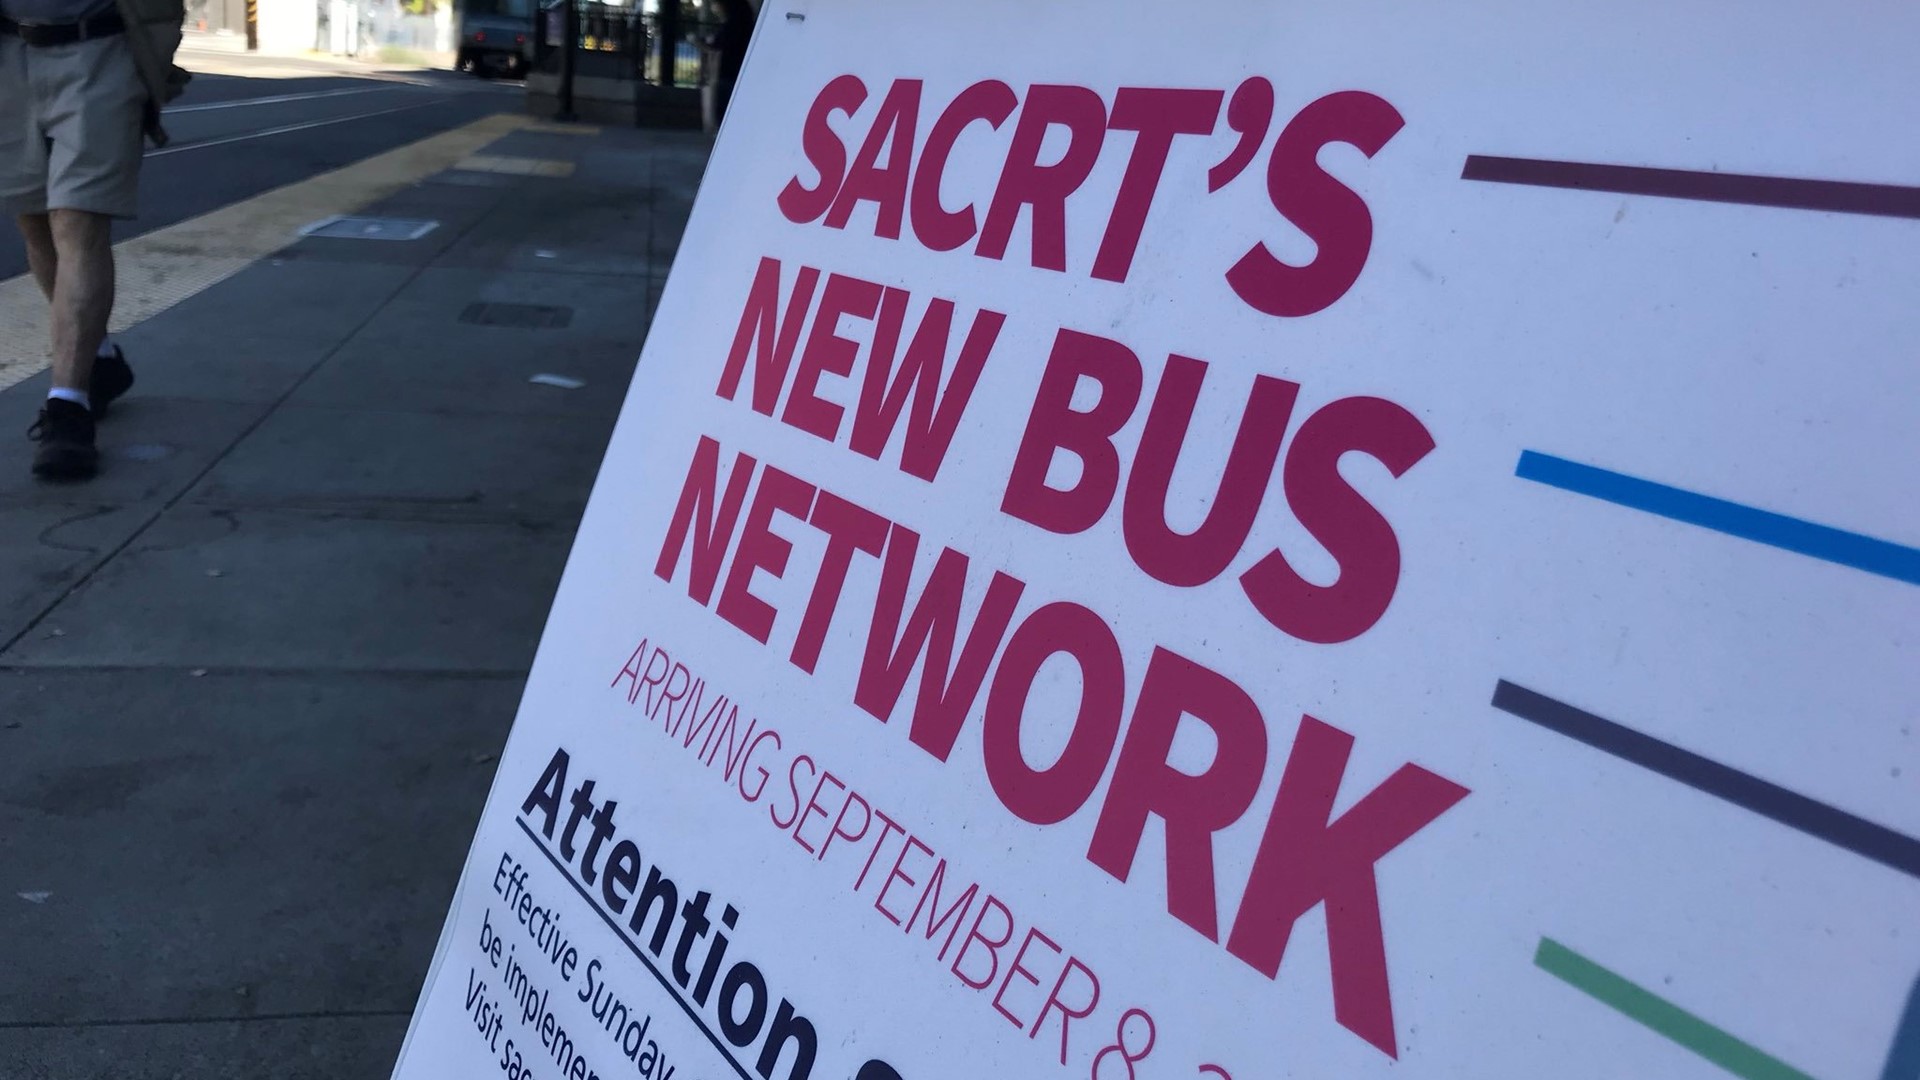 SacRT is launching a newly redesigned bus network on Sunday. This is the first time they've made major changes in 30 years, and to celebrate they're also offering free rides across the SacRT network Sunday through Wednesday.